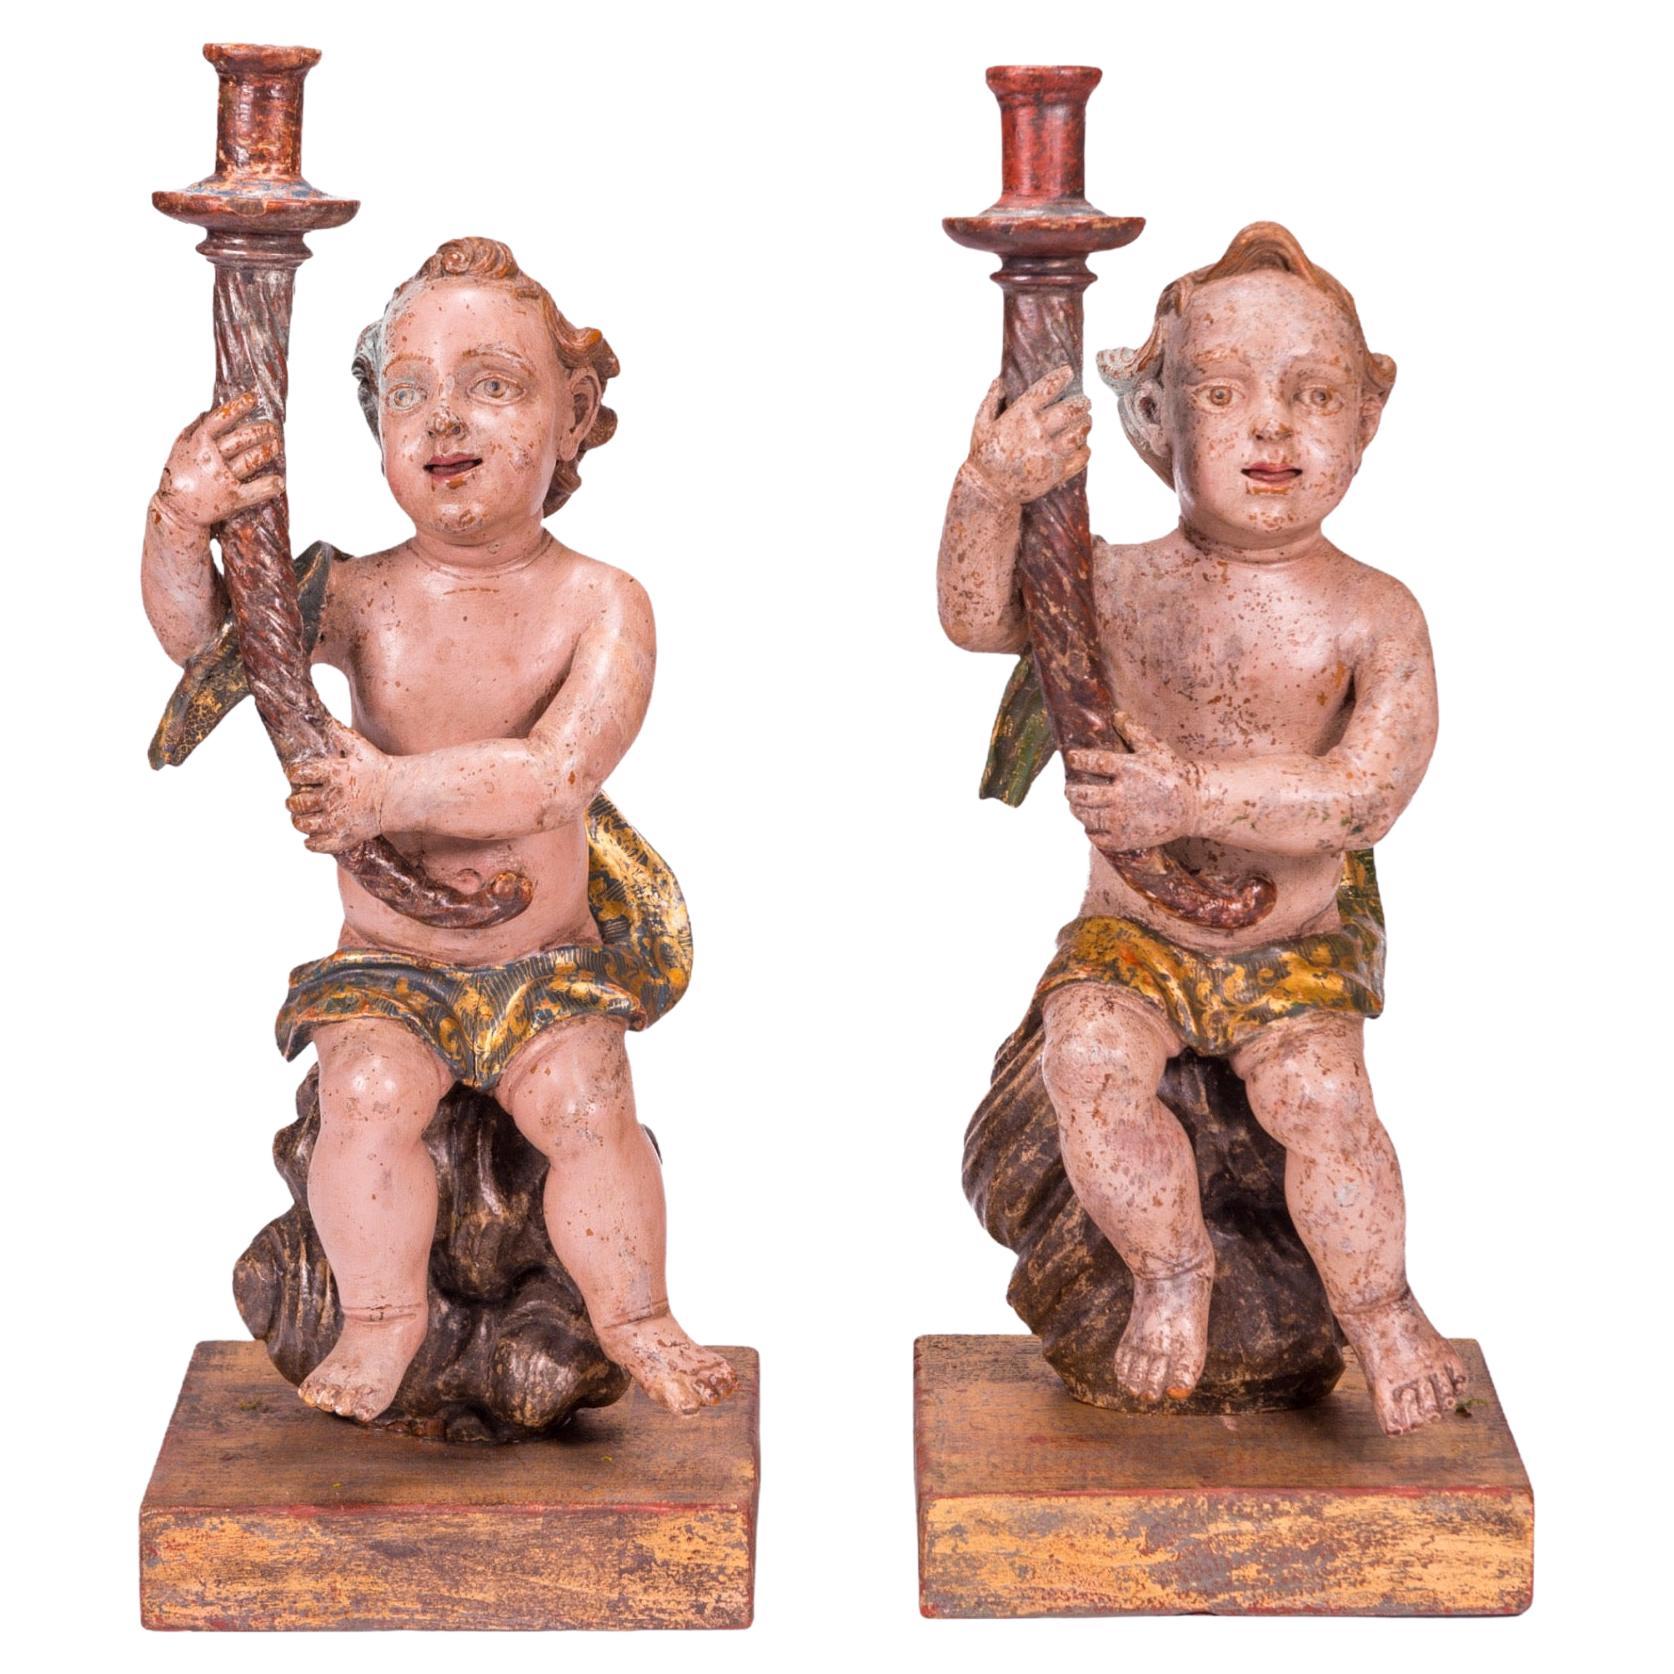 Angel Sculptures with Torch Shaped Candleholders, 17th Century